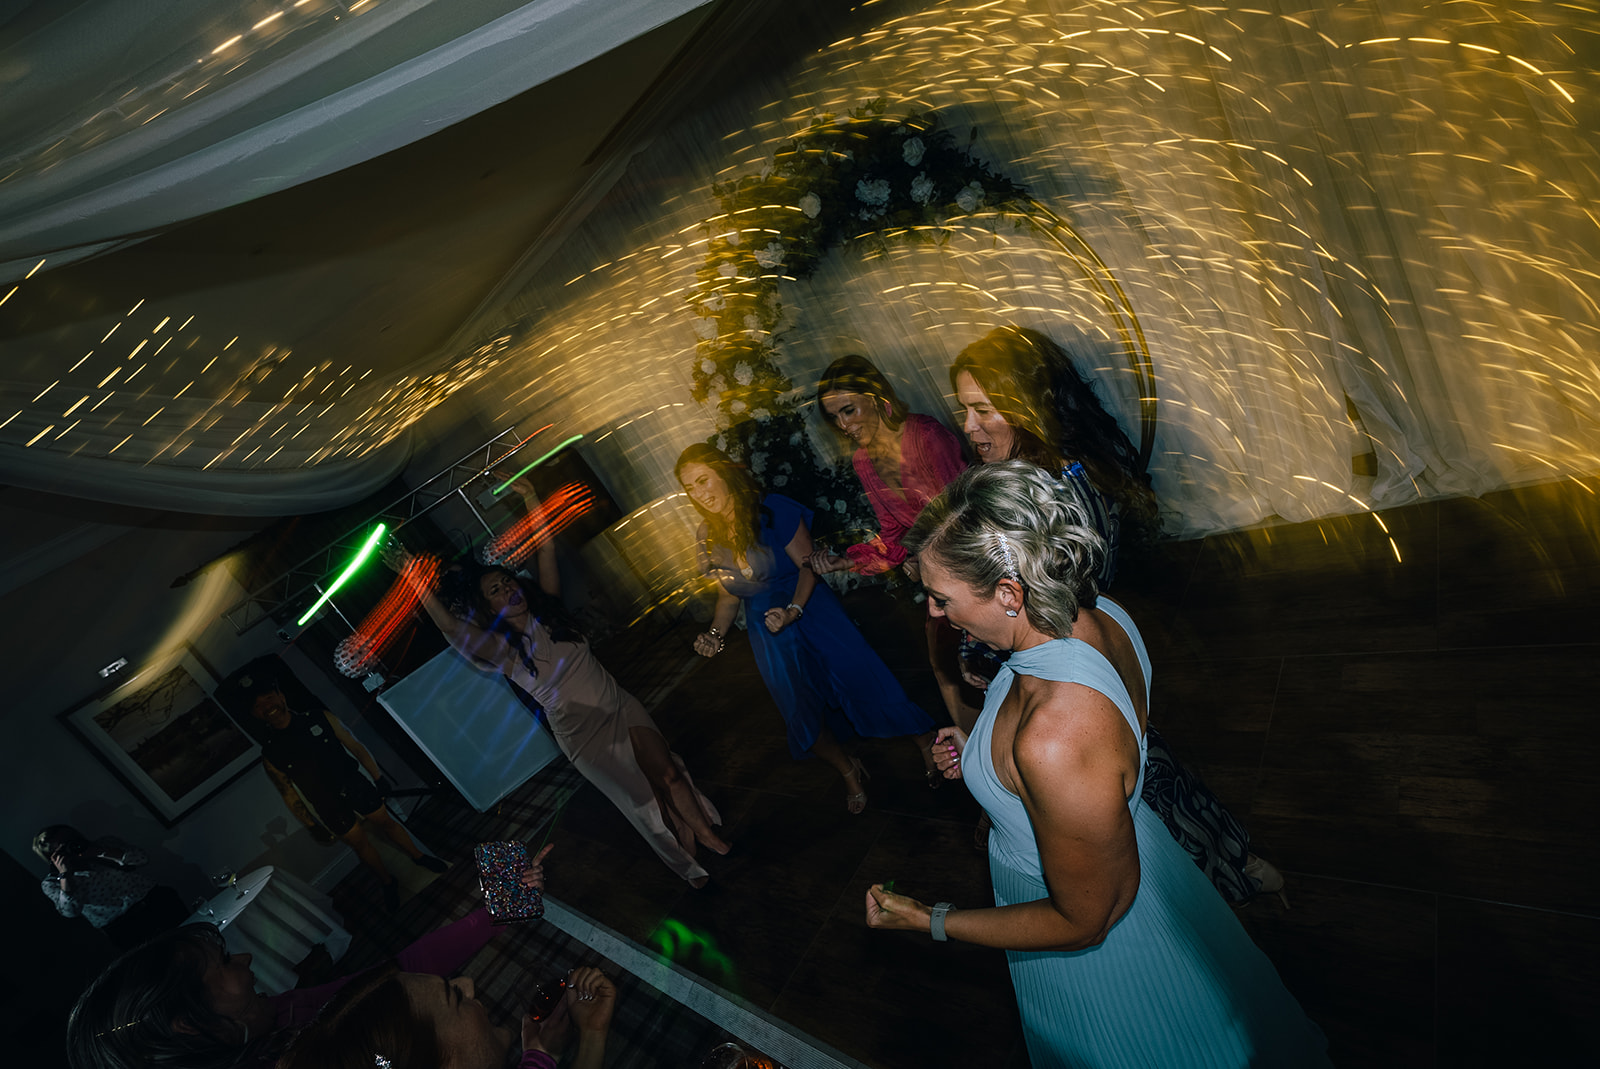 Wedding photographs of dancing at the Coniston Hotel